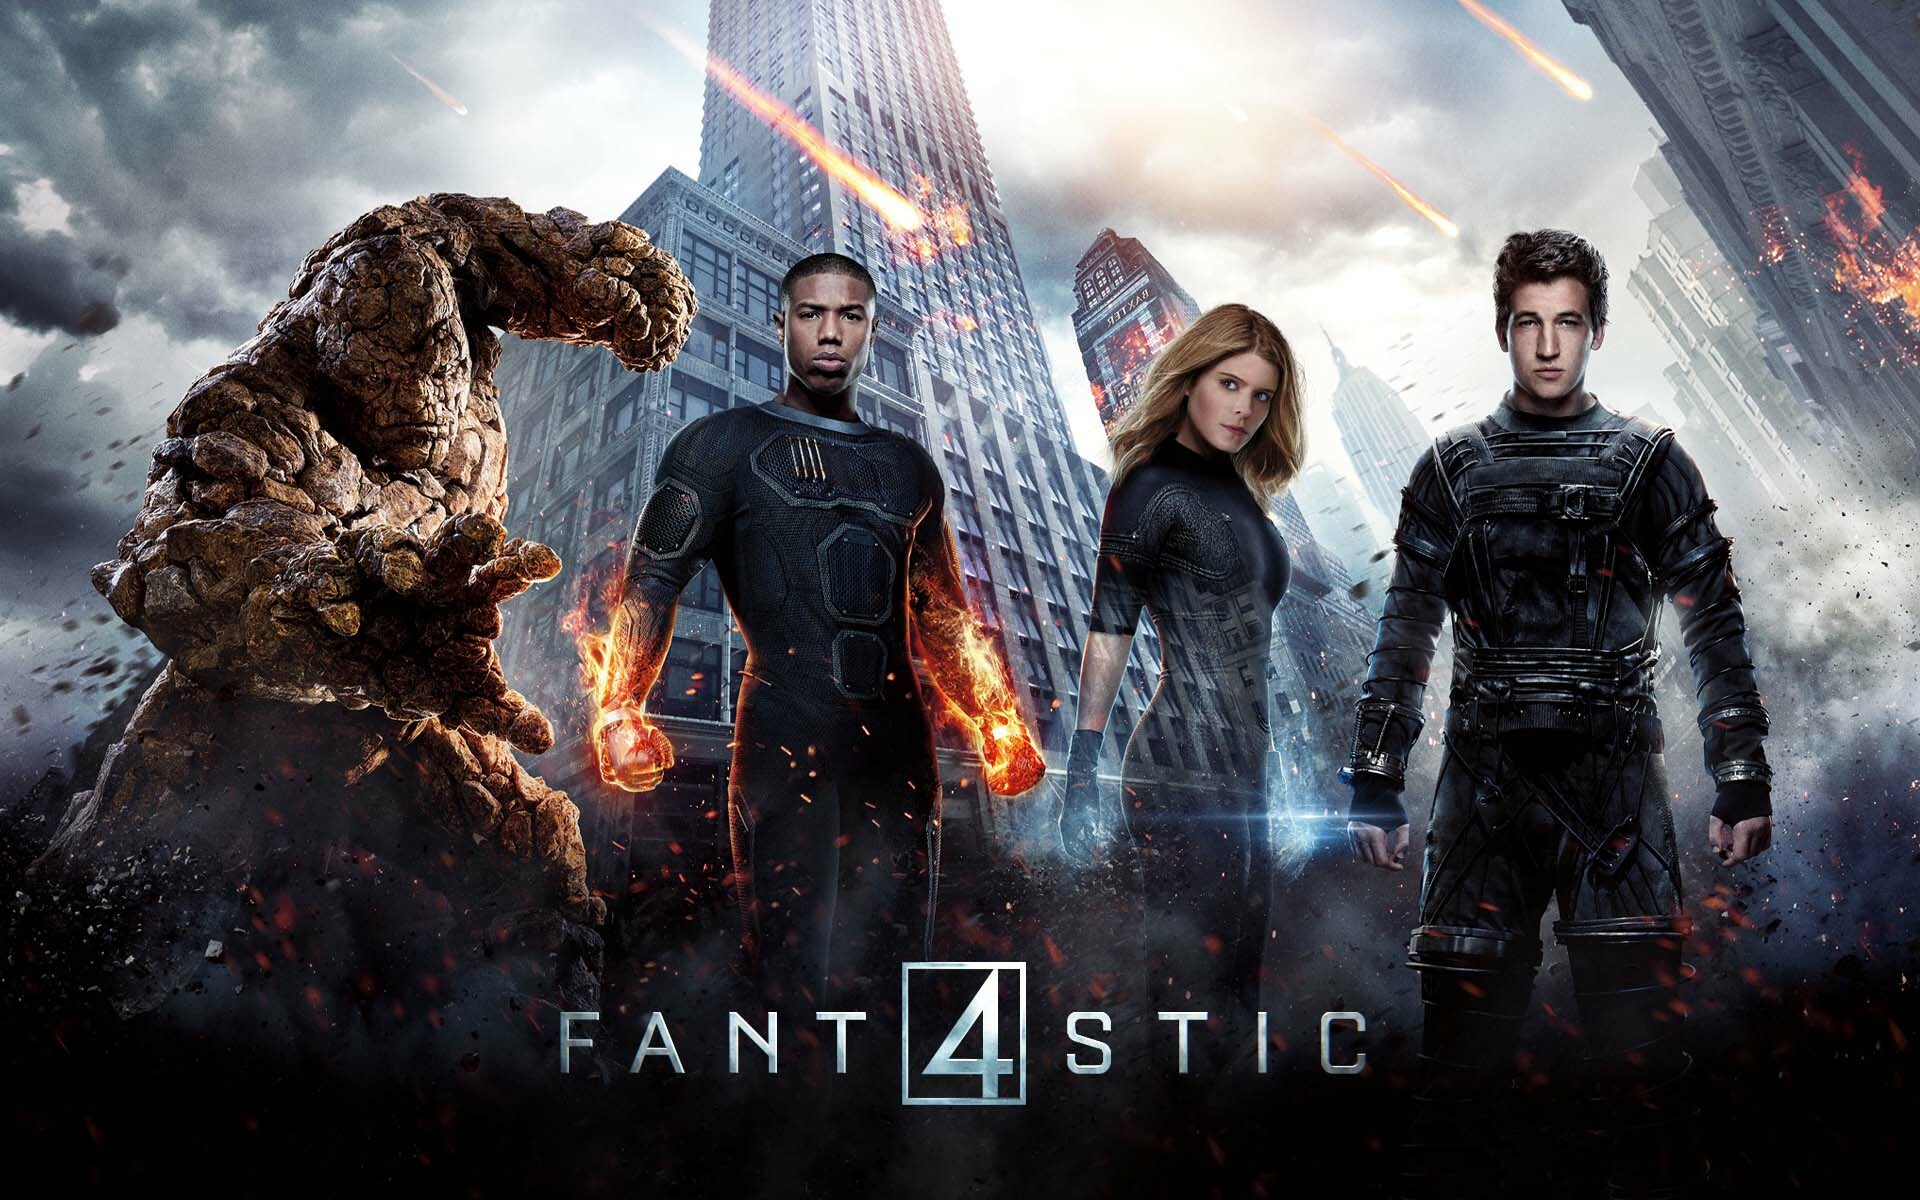 Fantastic 4: The group of Marvel heroes, The Thing, The Human Torch. 1920x1200 HD Wallpaper.